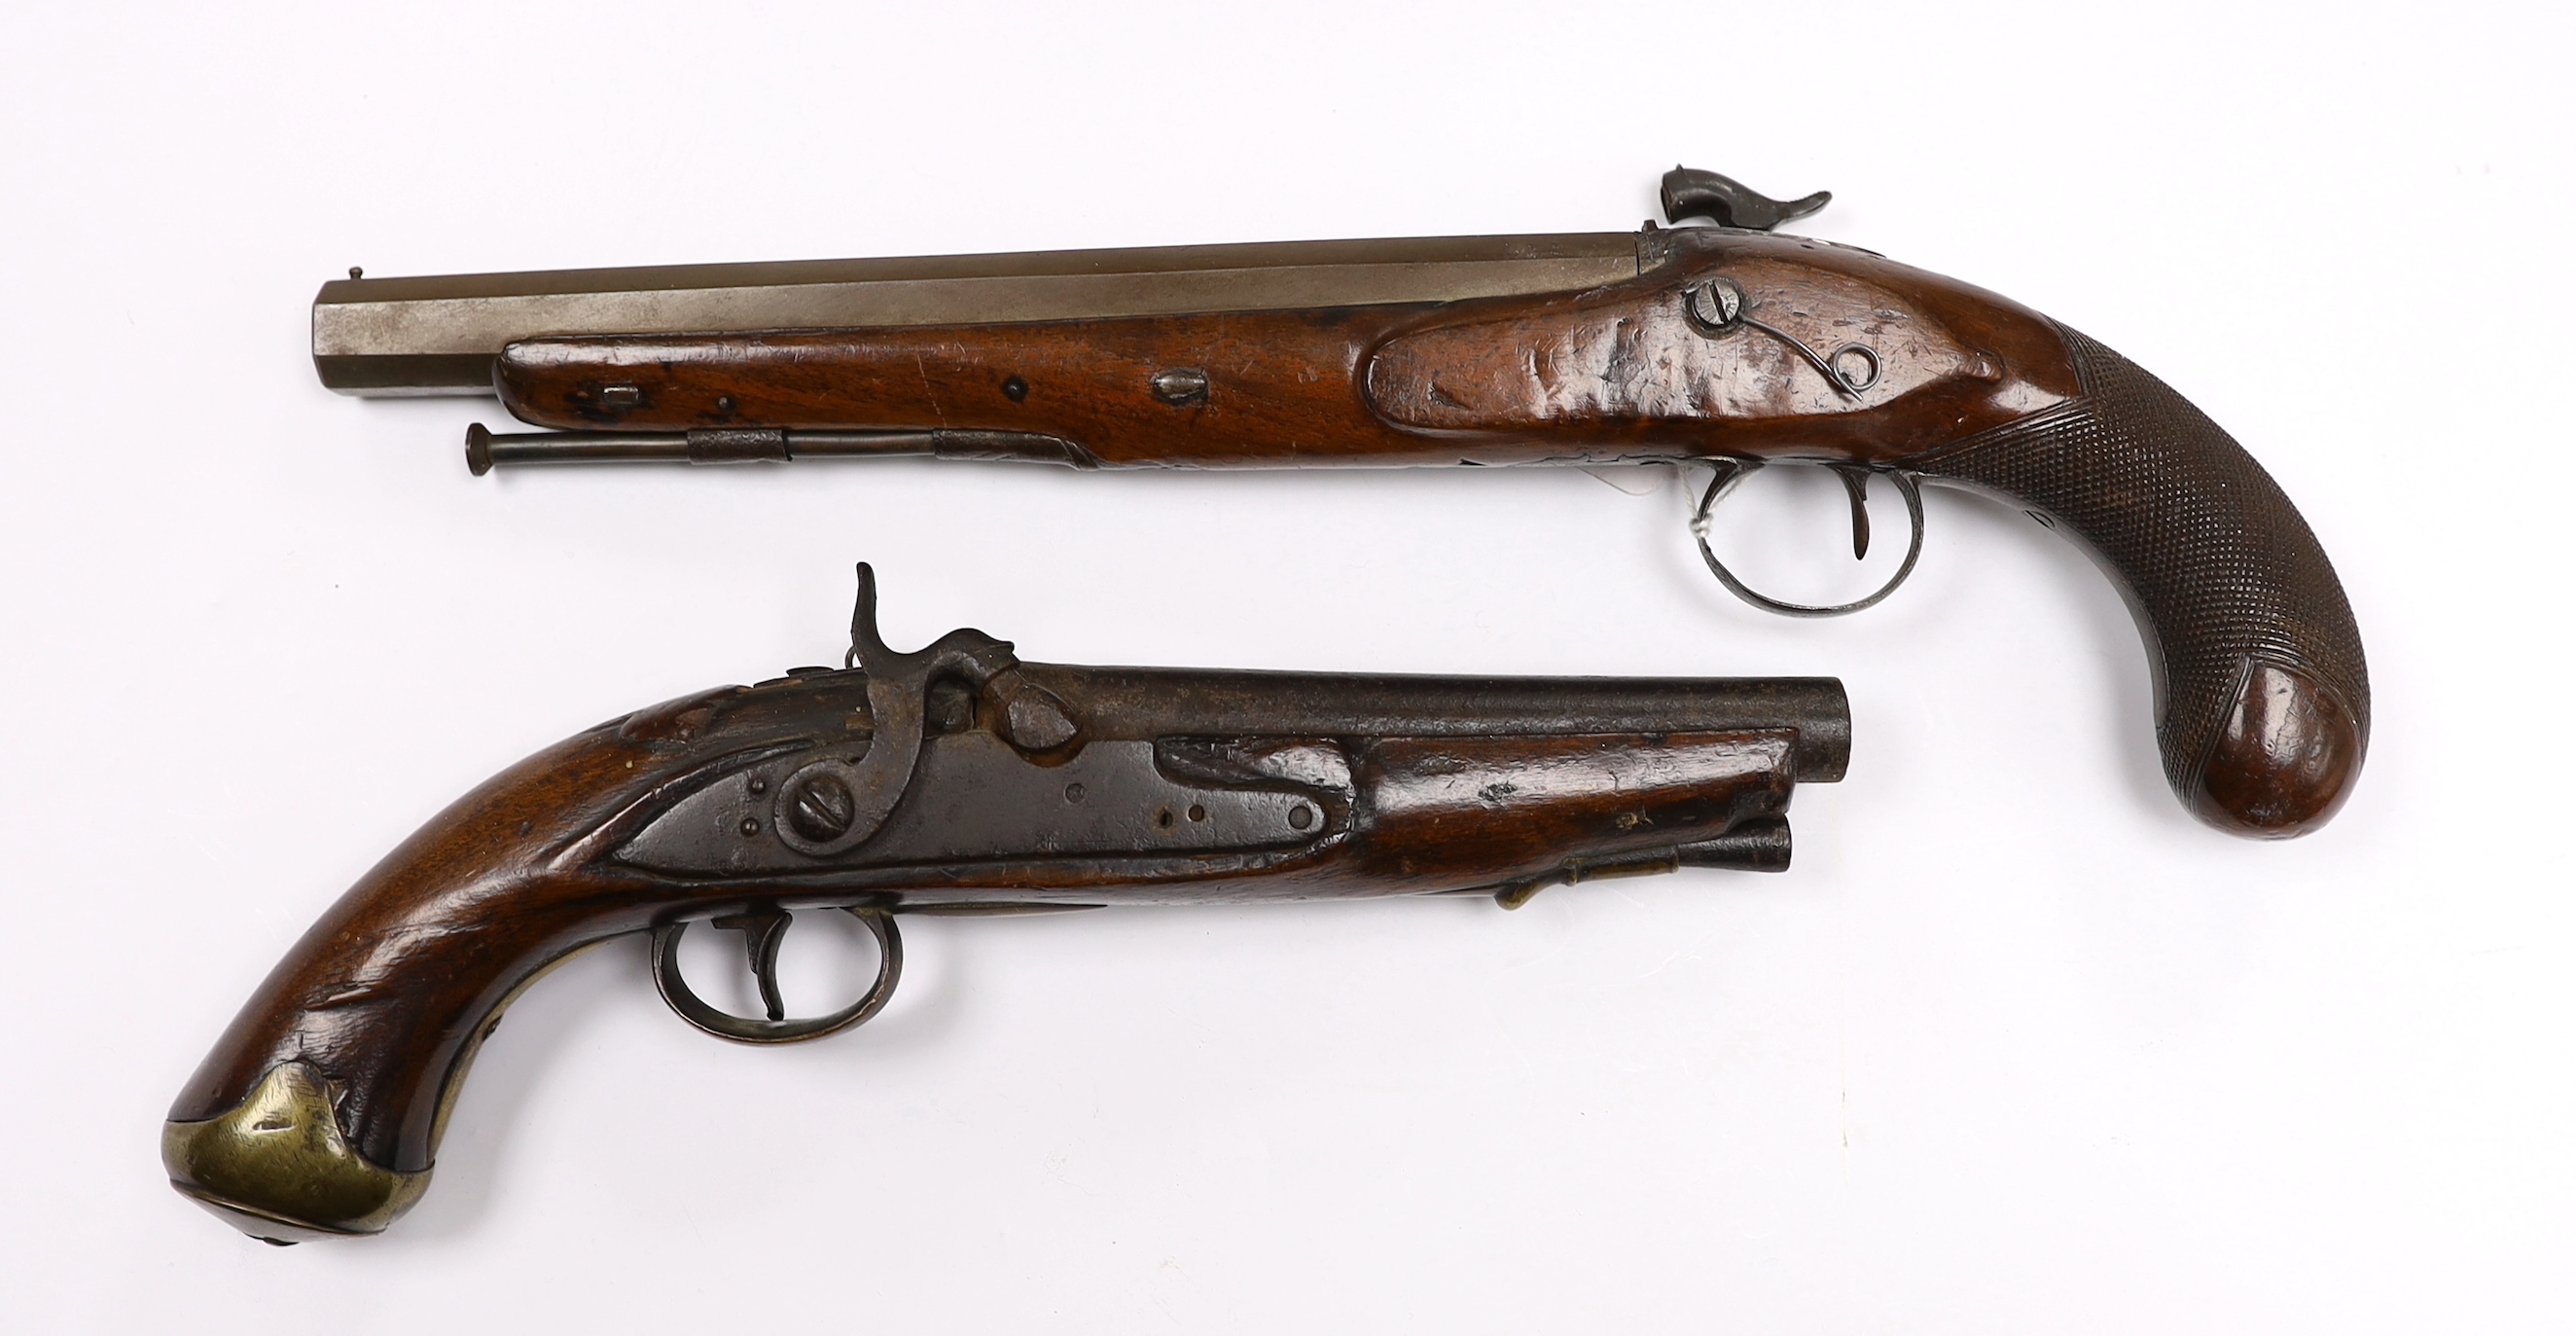 Two percussion 19th century pistols, both converted from flintlock, the larger example with engraved lock and hammer, octagonal barrel and chequered grip, together with a smaller overcoat pistol, fully stocked with brass